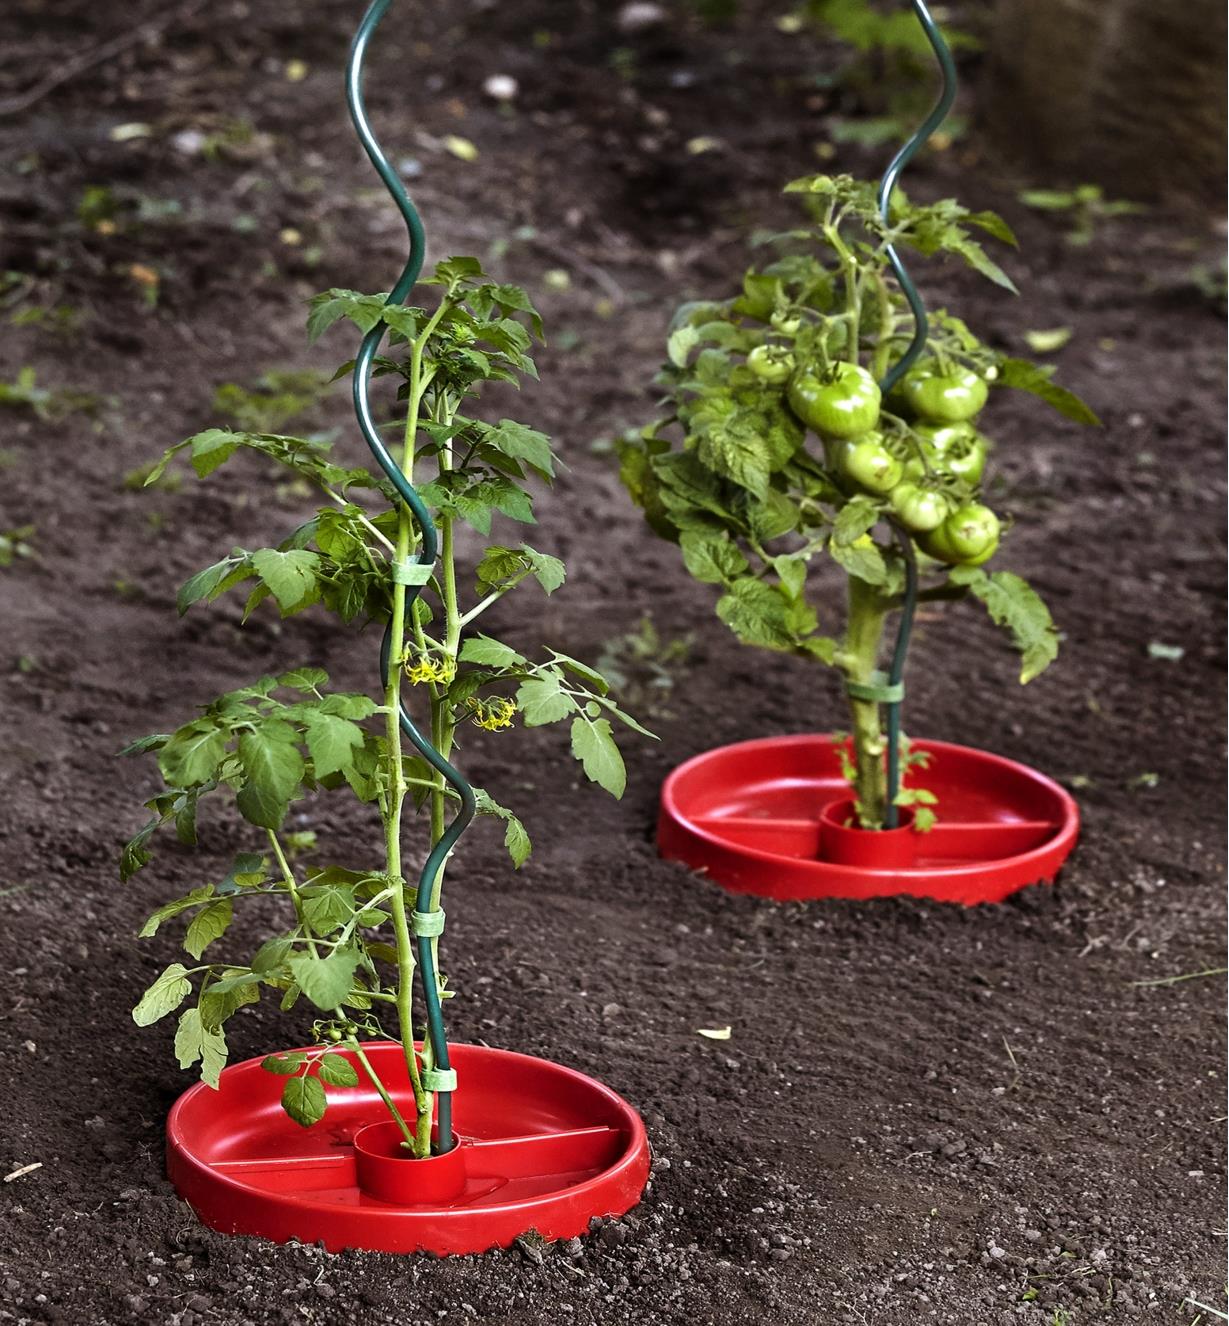 Two tomato plants, each being grown within a Tomato Crater and supported by a spiral stake